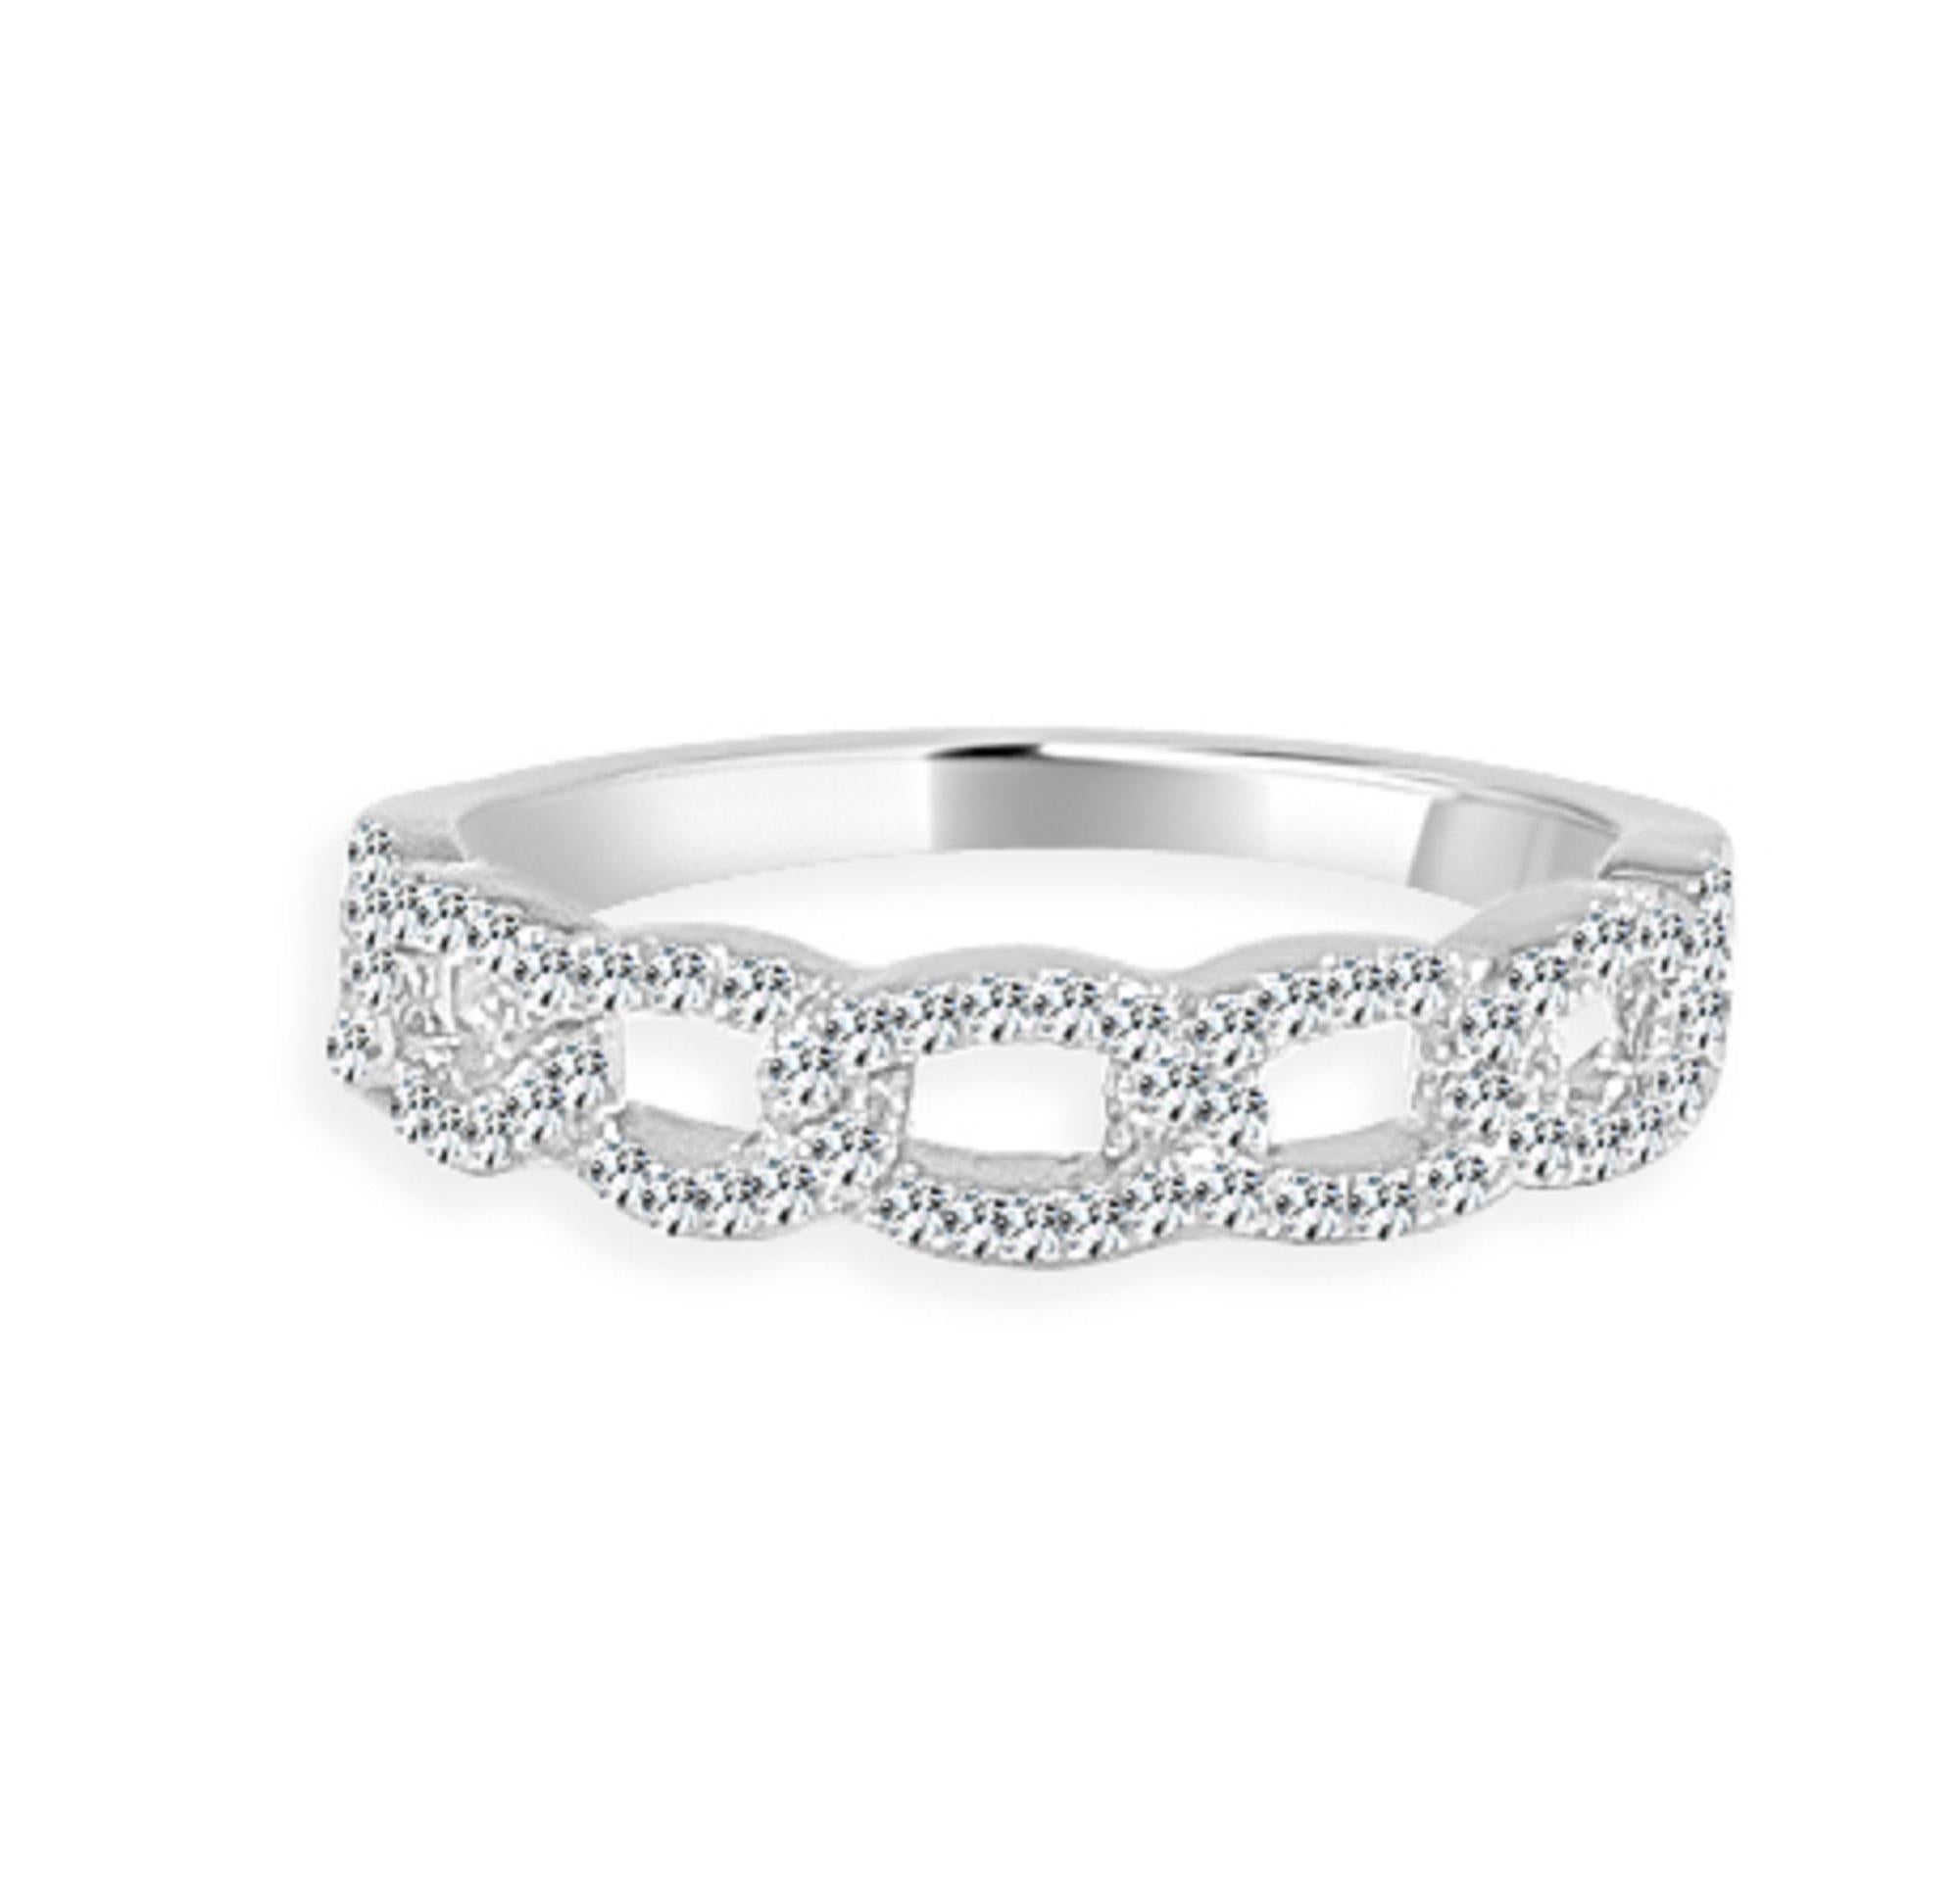 Bring the brilliance of diamonds to your everyday style! Sparkling and light, this gorgeous ring glistens with diamonds in a compelling pattern over the top. Sleek and chic, it'll pair with just about anything in your closet and have you looking